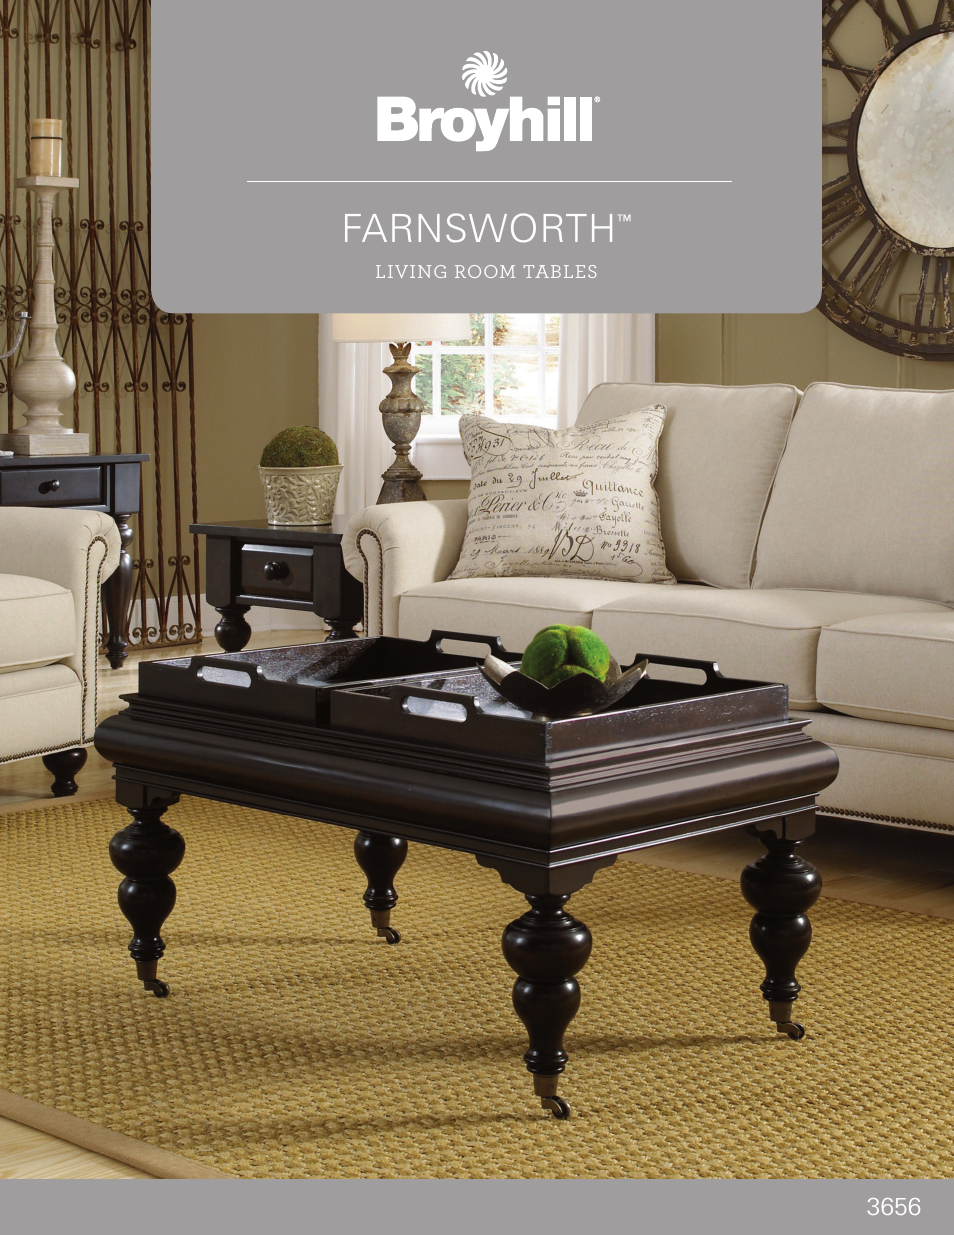 FARNSWORTH END TABLE Product Details